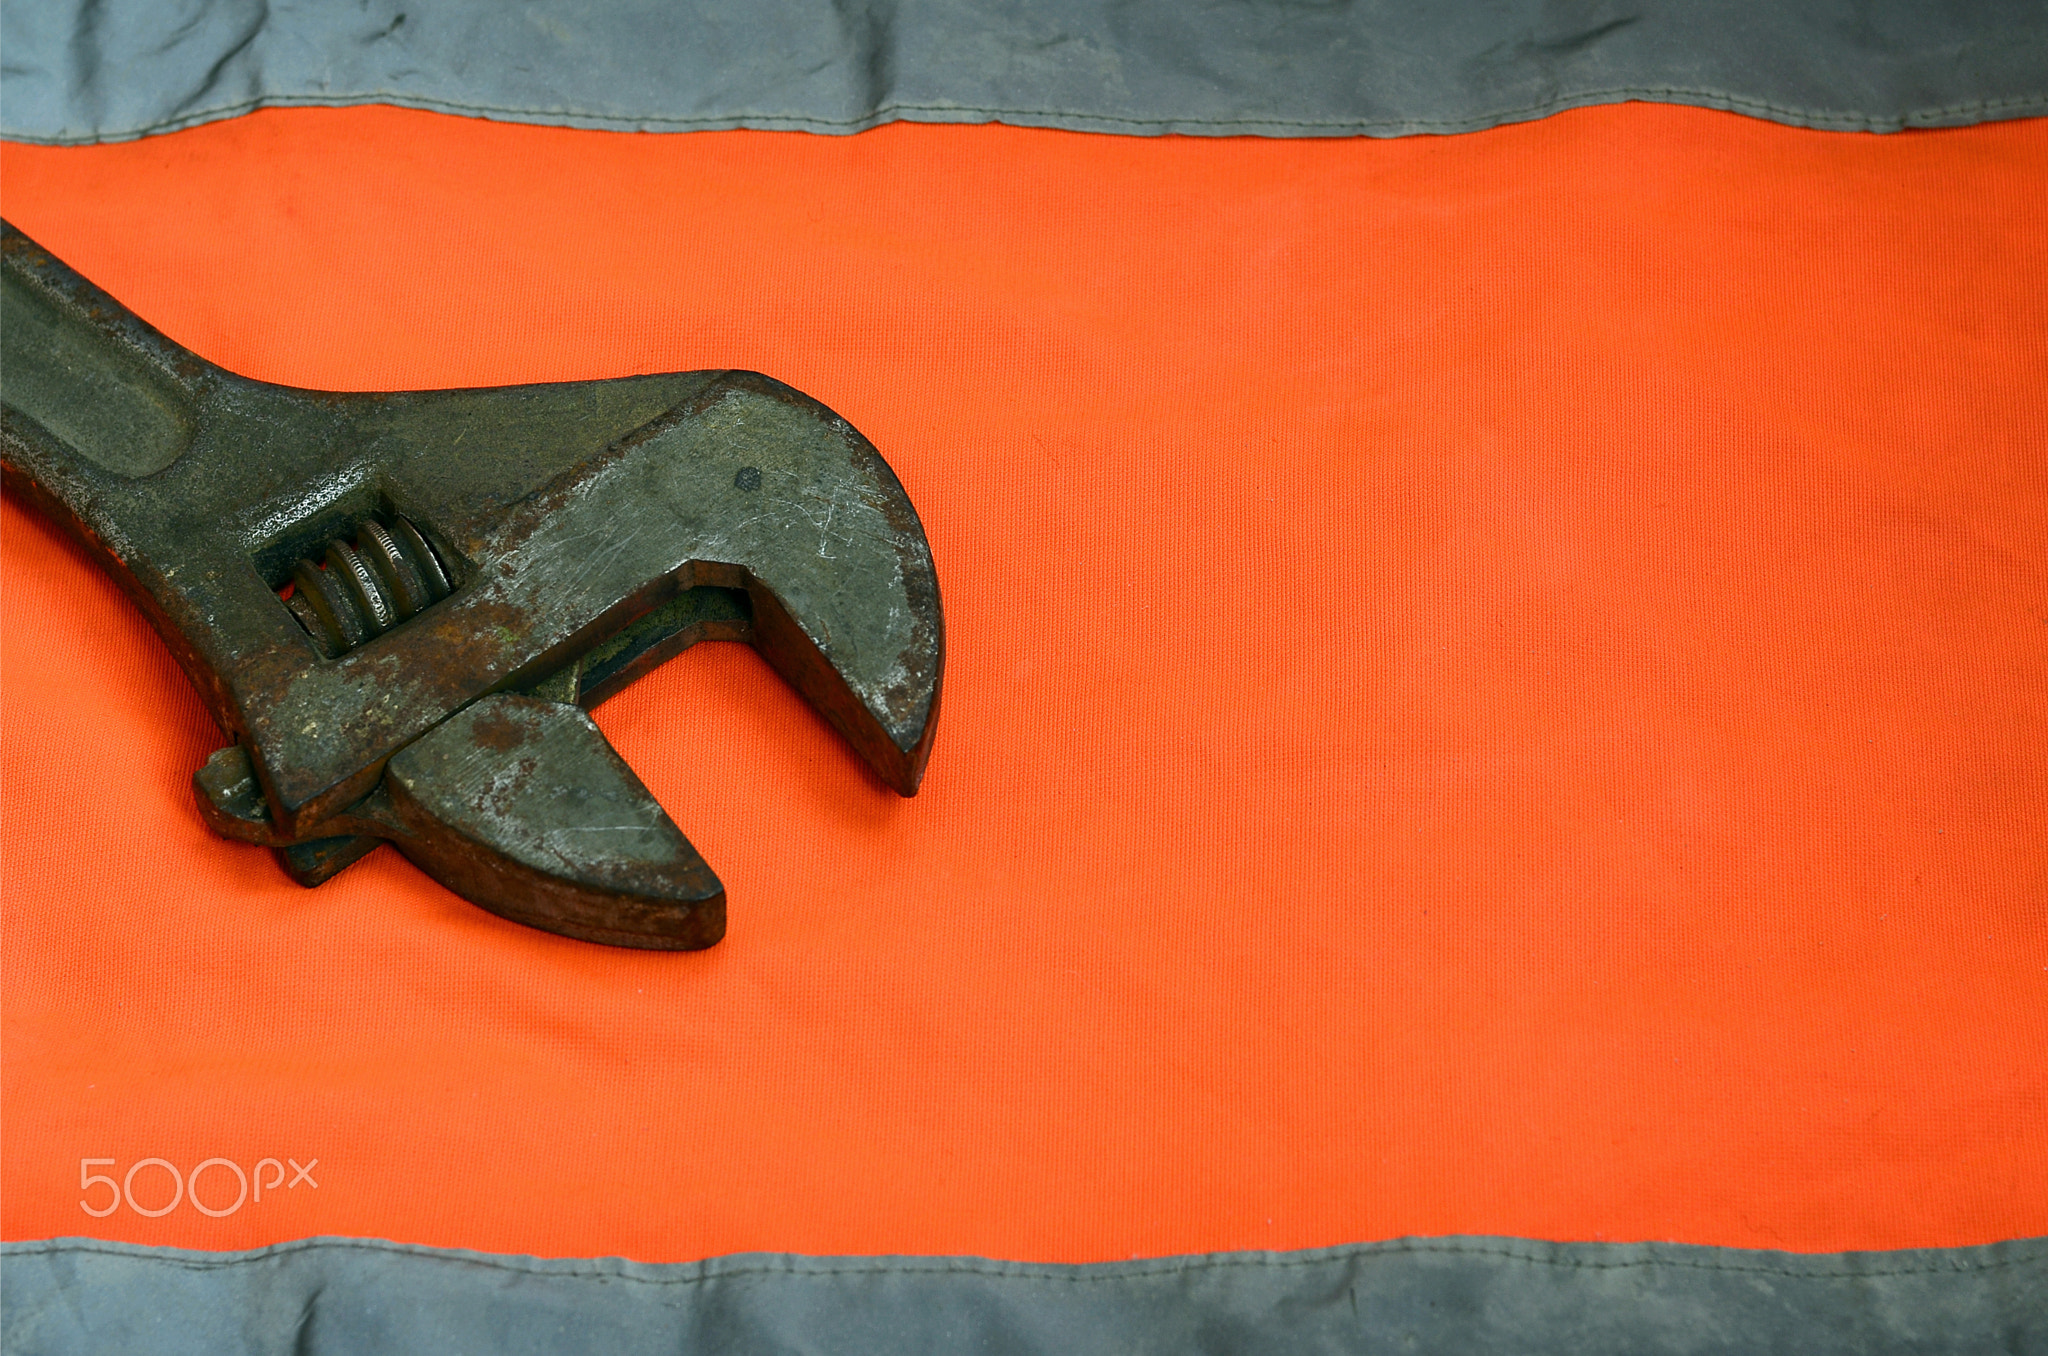 Adjustable wrench against the background of an orange signal worker shirt